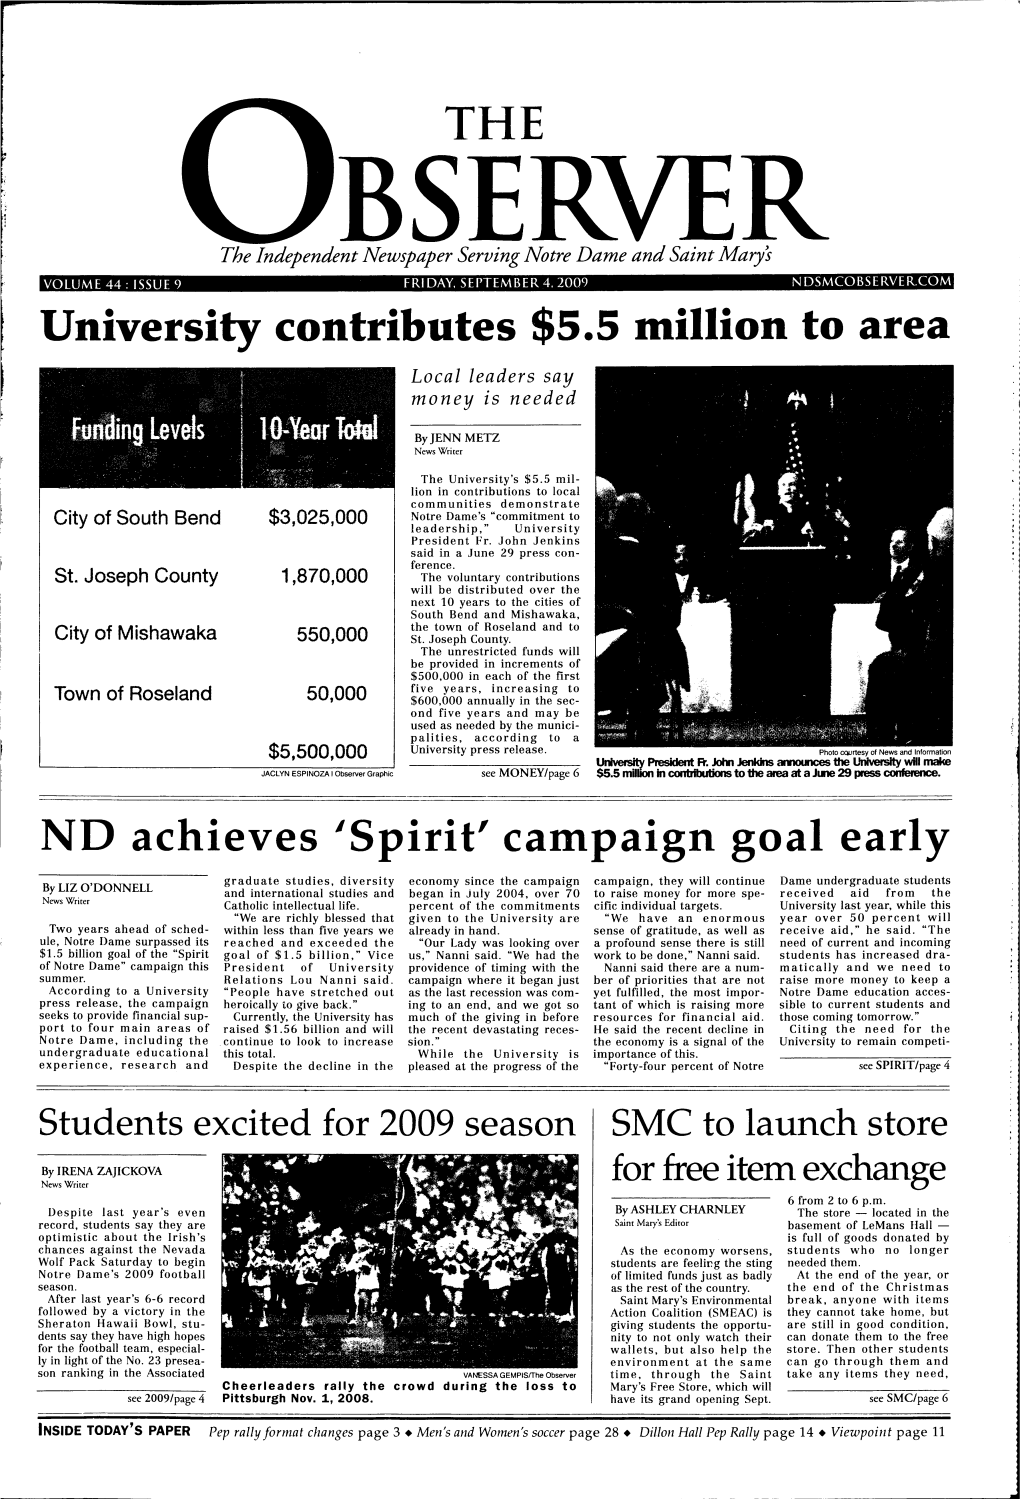 ND Achieves 'Spirit' Campaign Goal Early